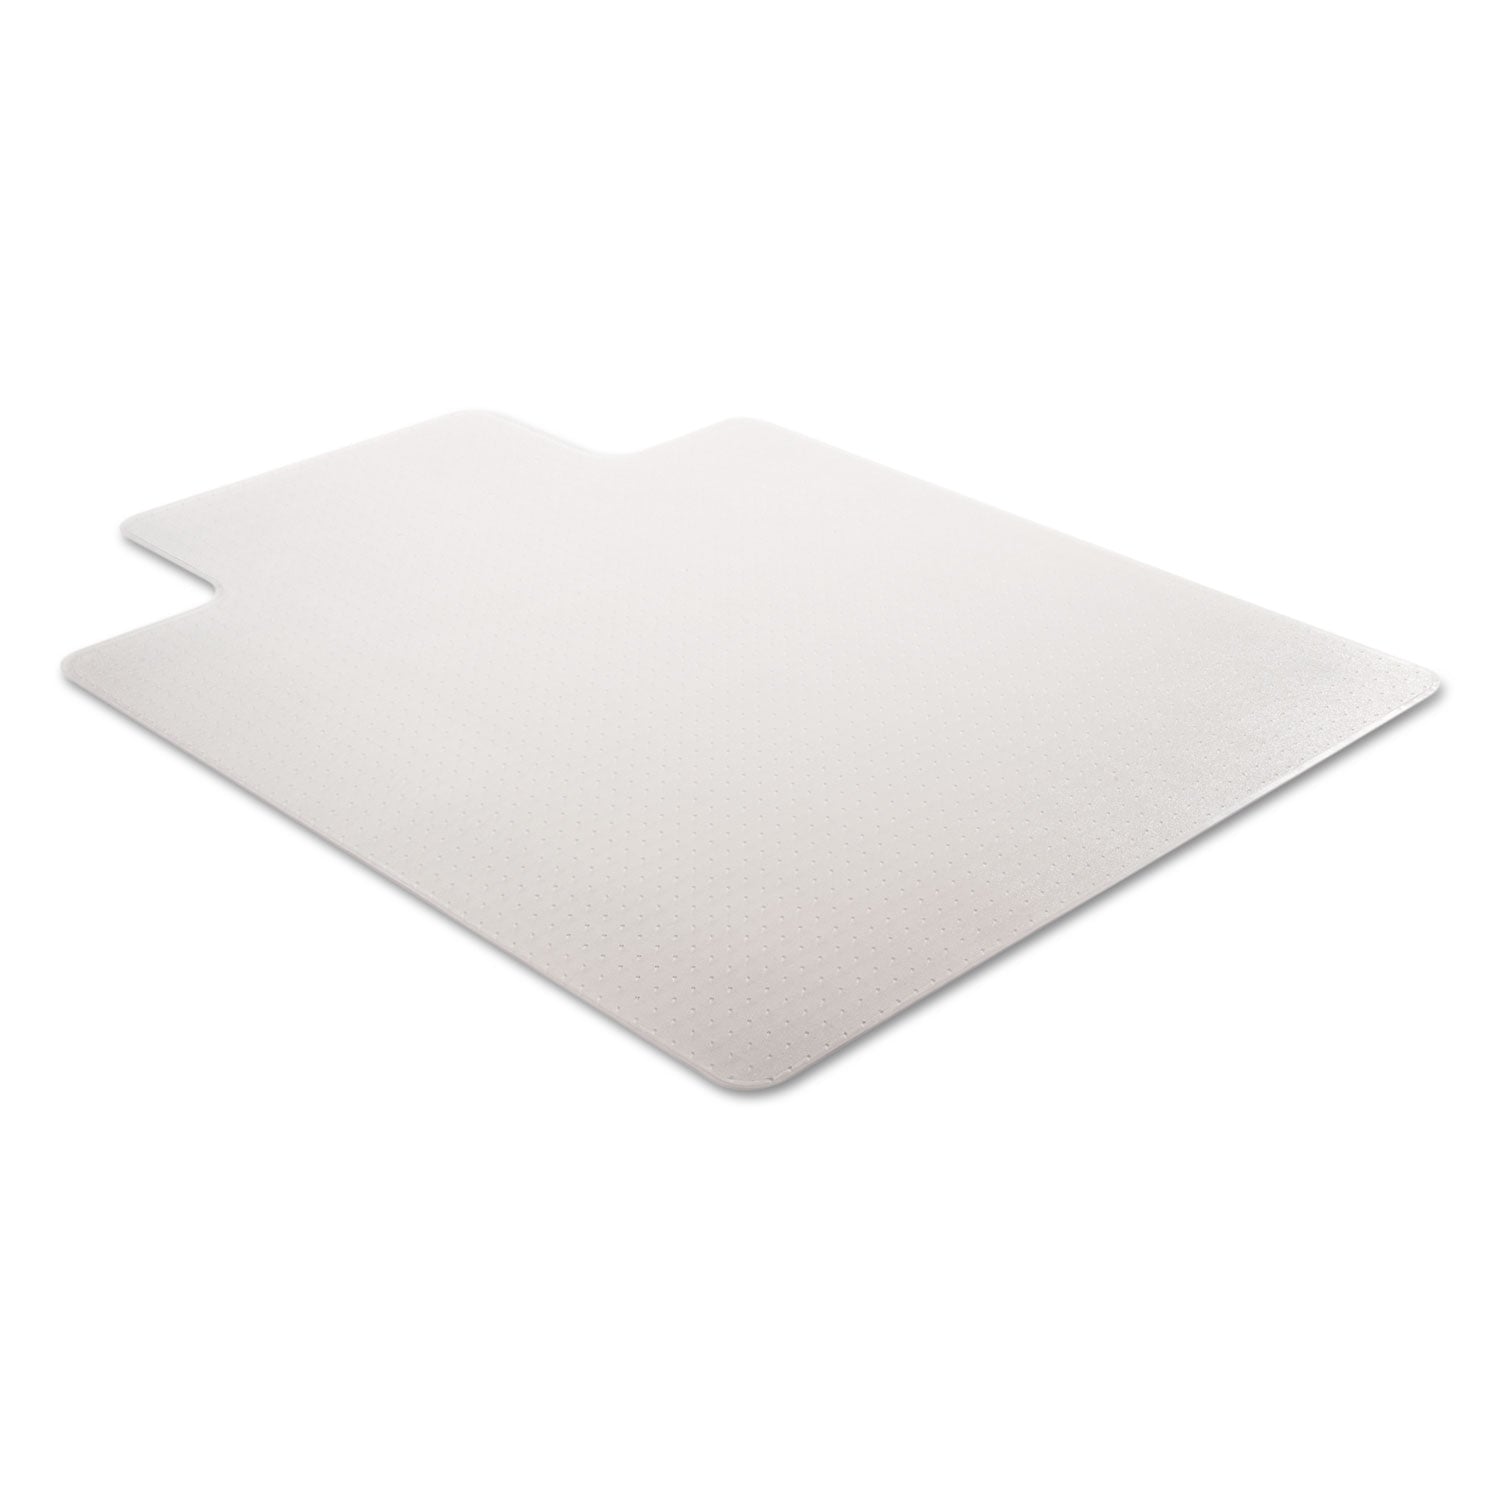 DuraMat Moderate Use Chair Mat for Low Pile Carpet, 46 x 60, Wide Lipped, Clear - 6